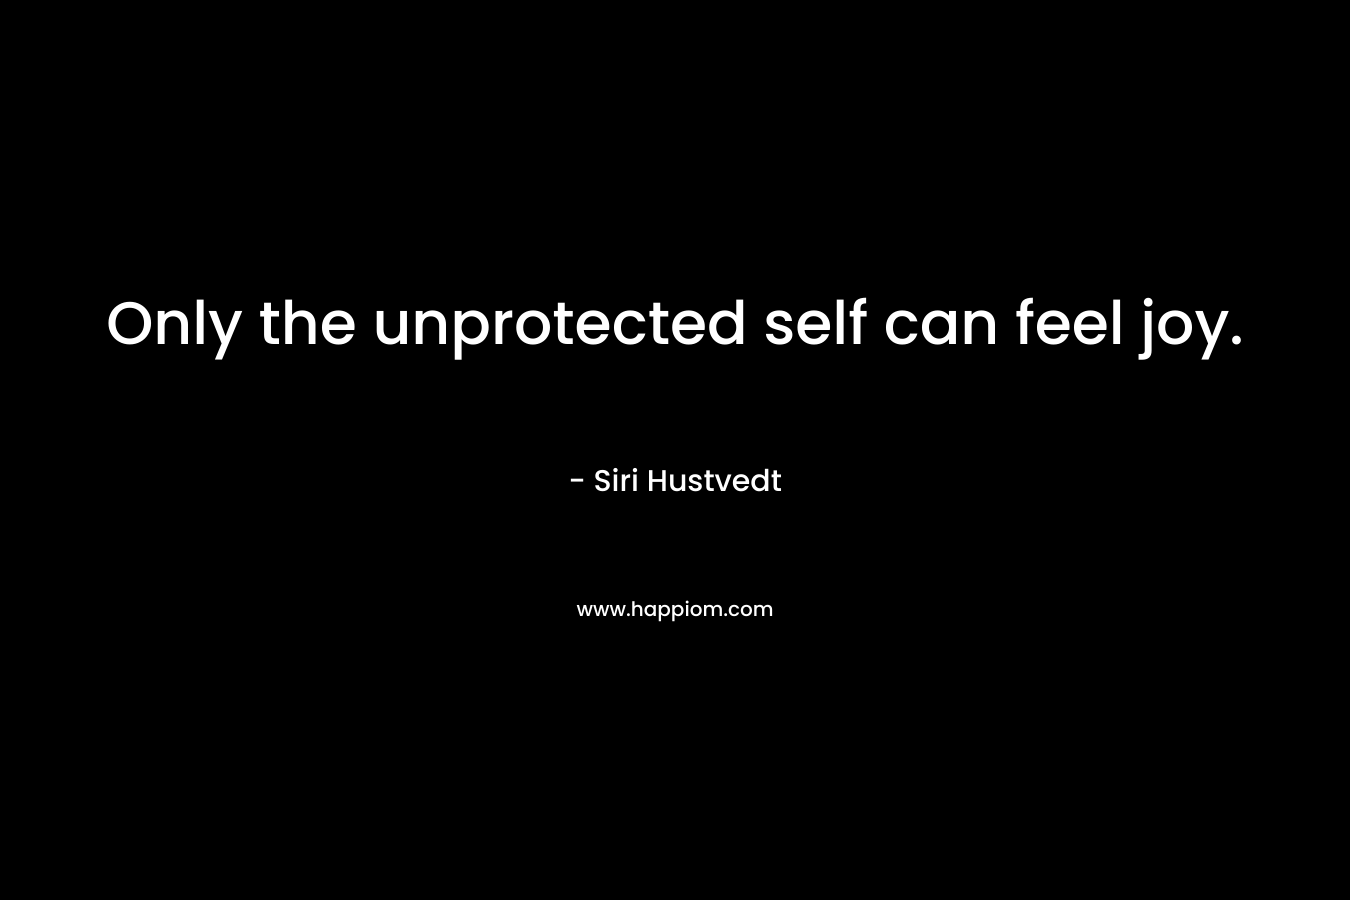 Only the unprotected self can feel joy.